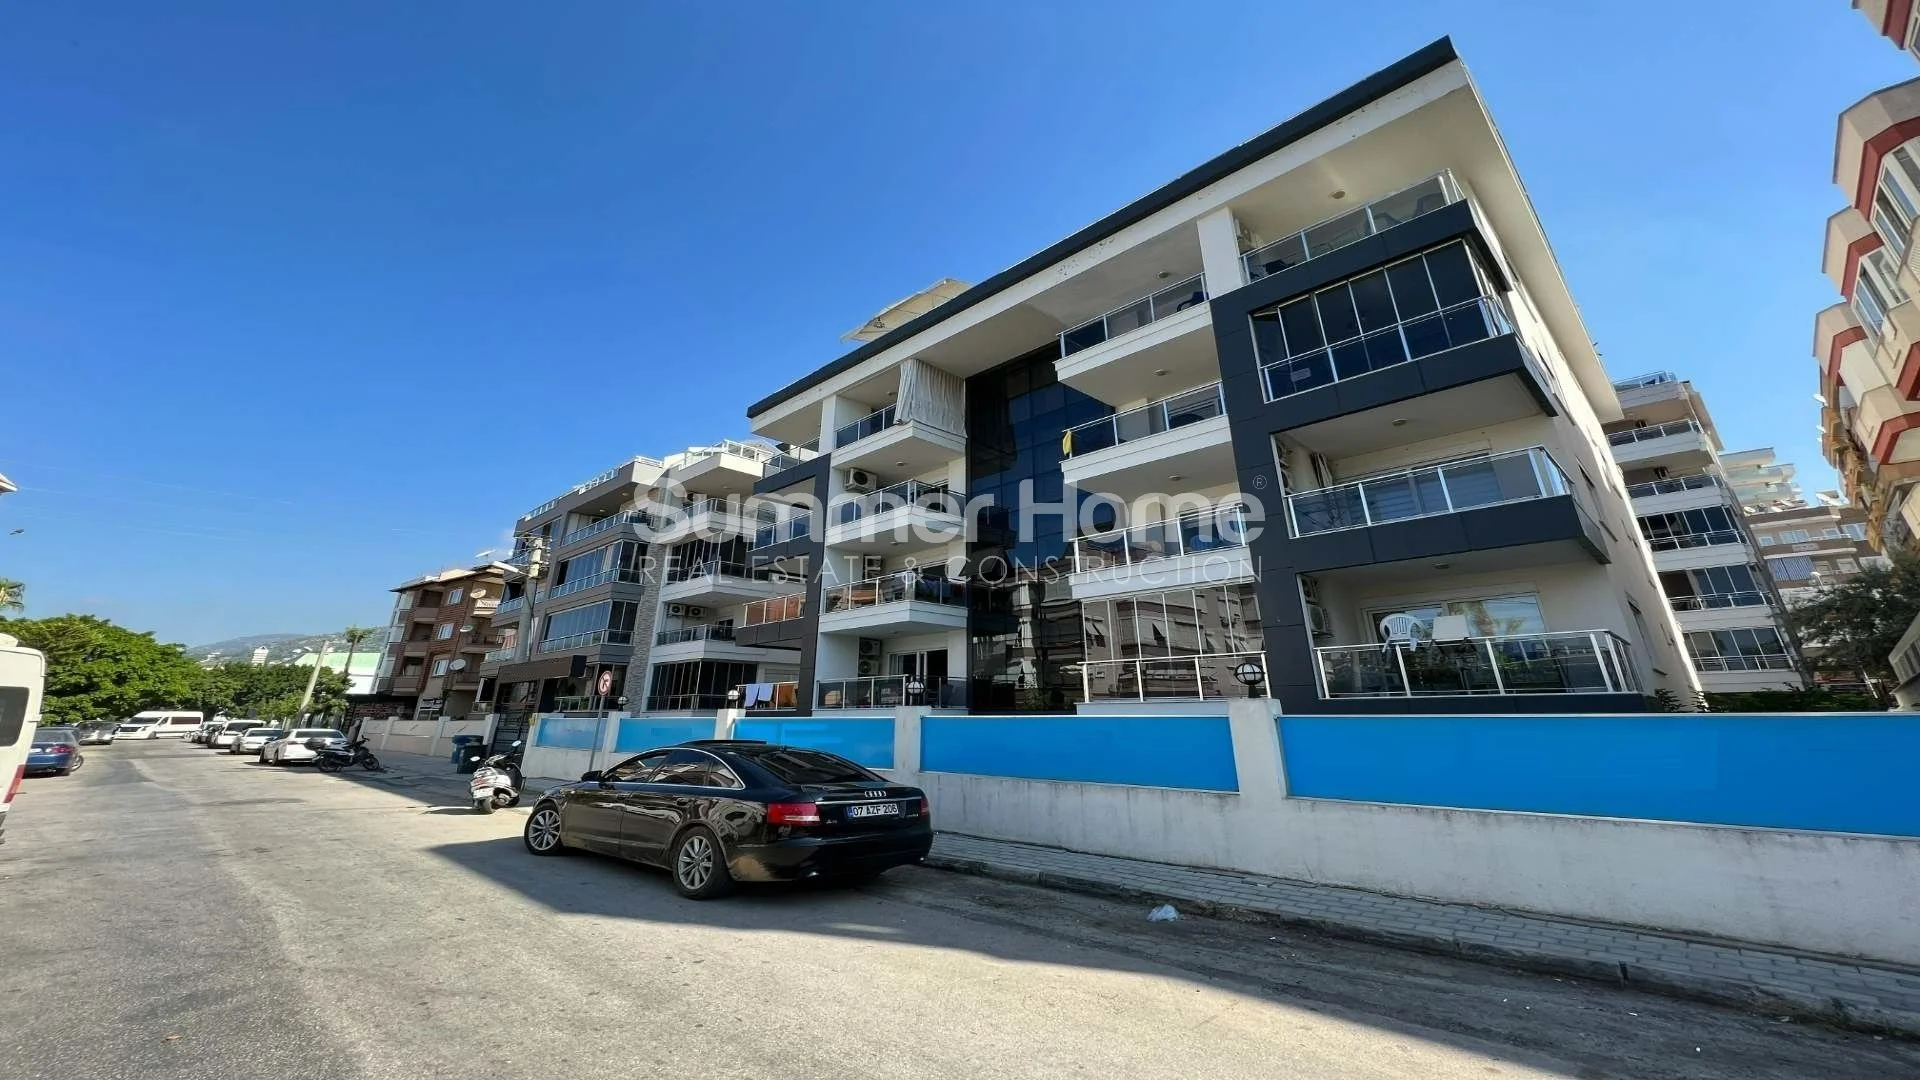 For sale Apartment Alanya Saray general - 3